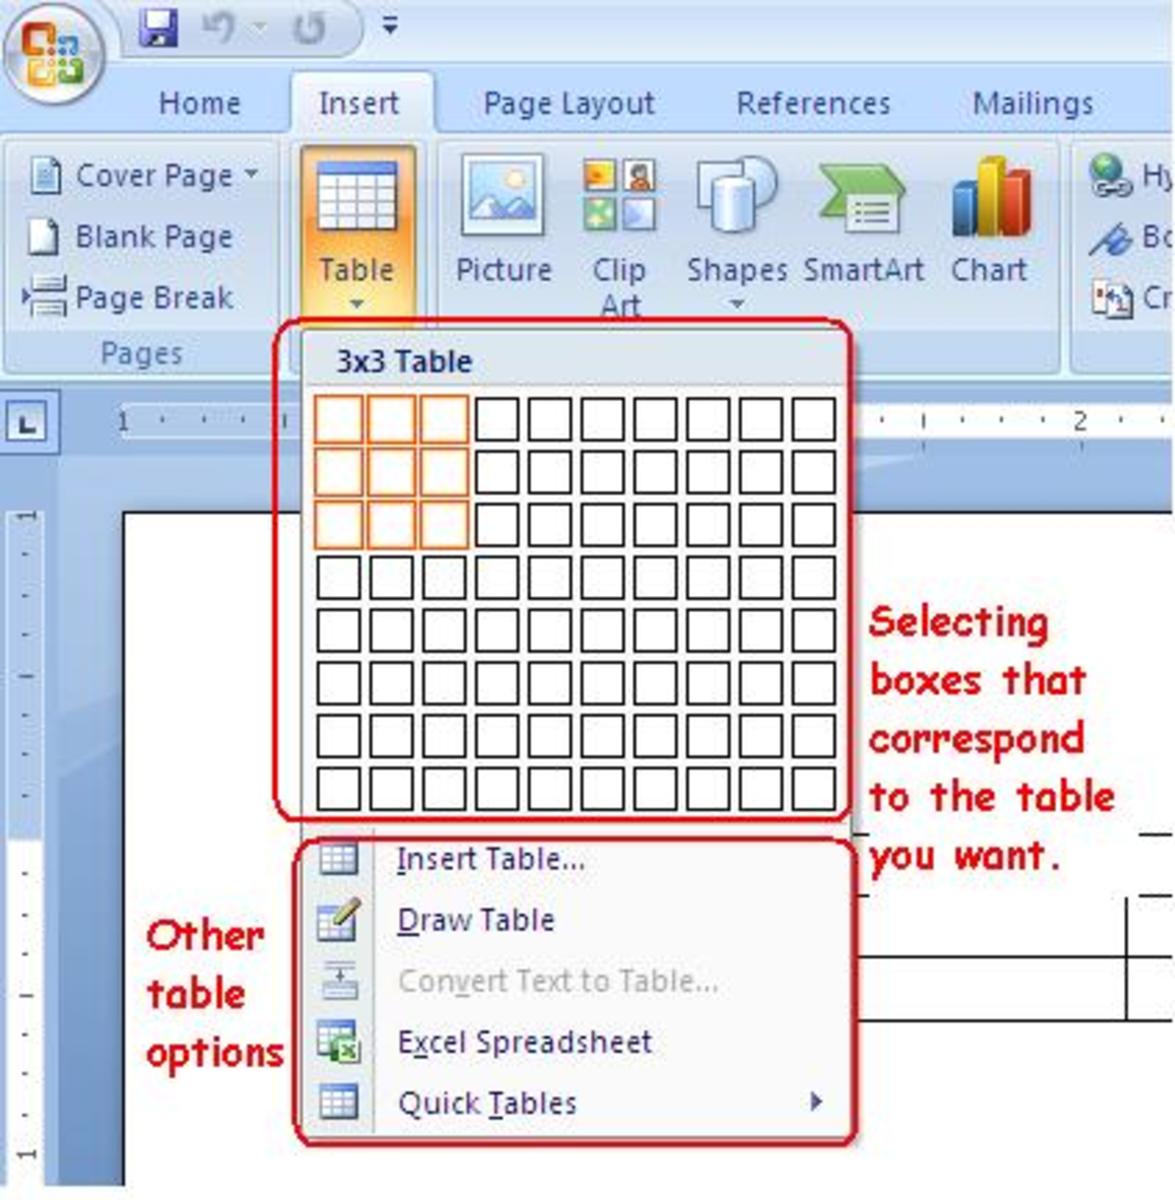 Options for creating tables in word 2007